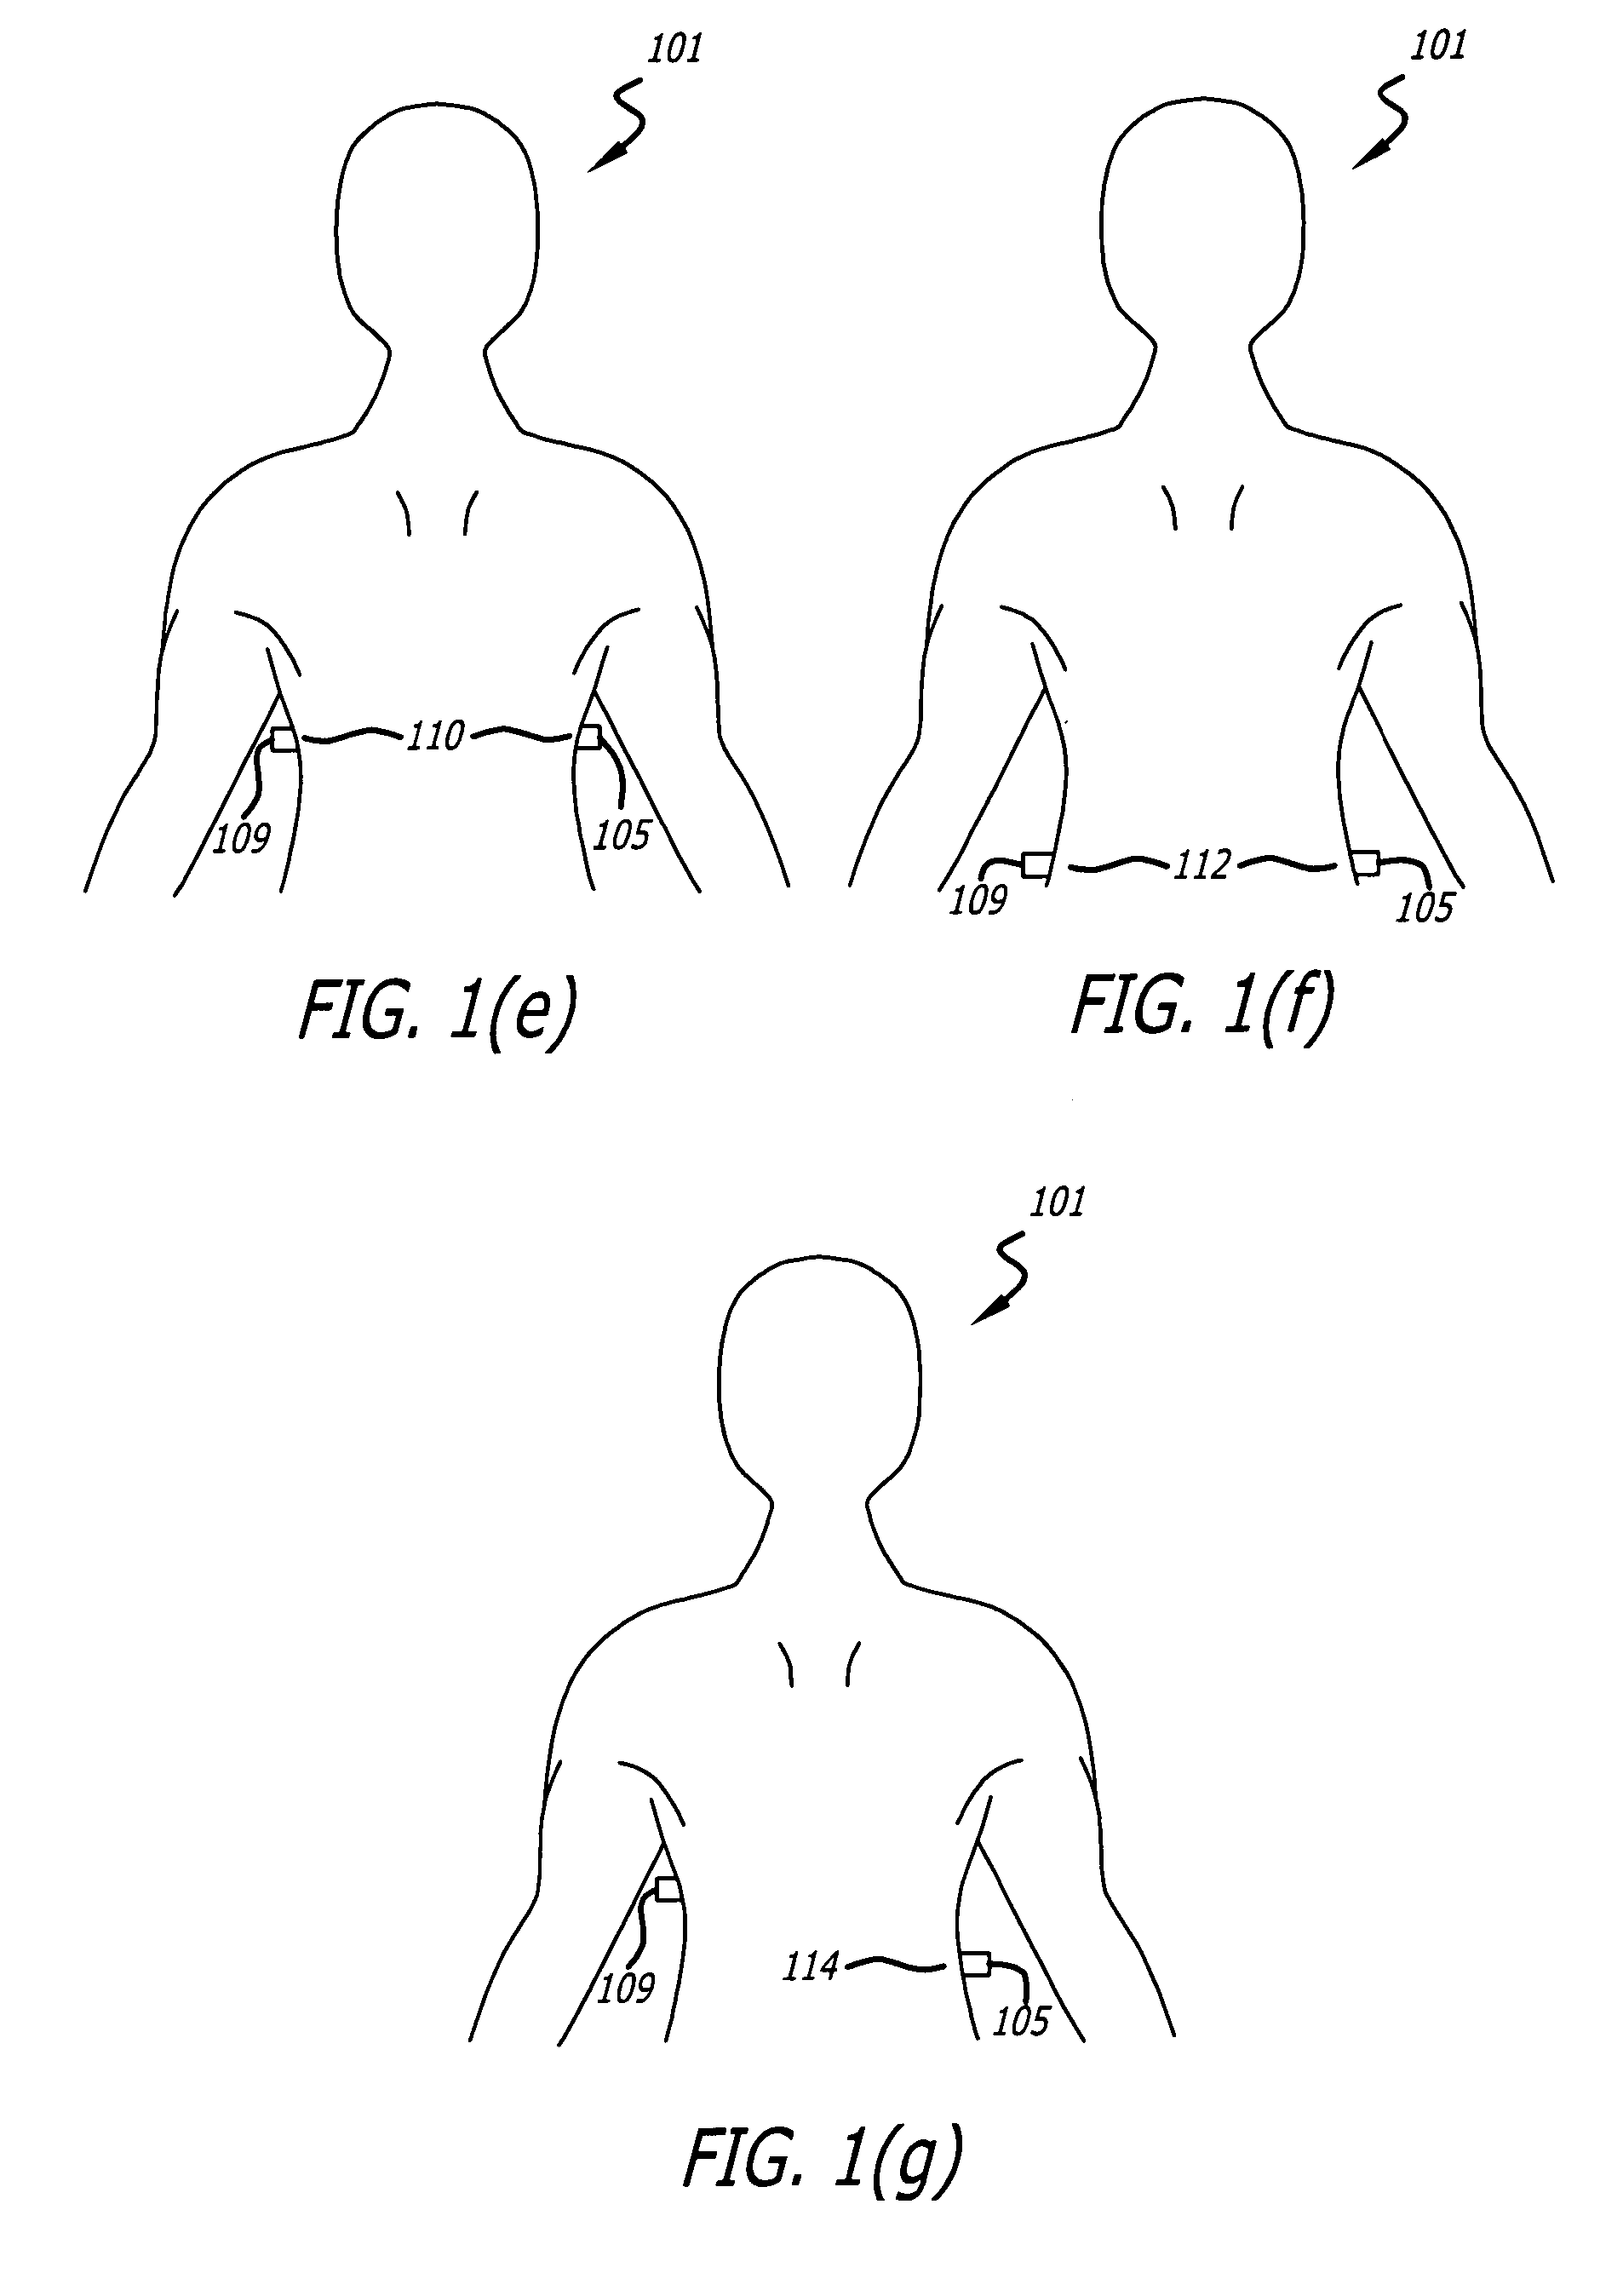 Vantilation and volume change measurements using permanent magnet and magnet sensor affixed to body